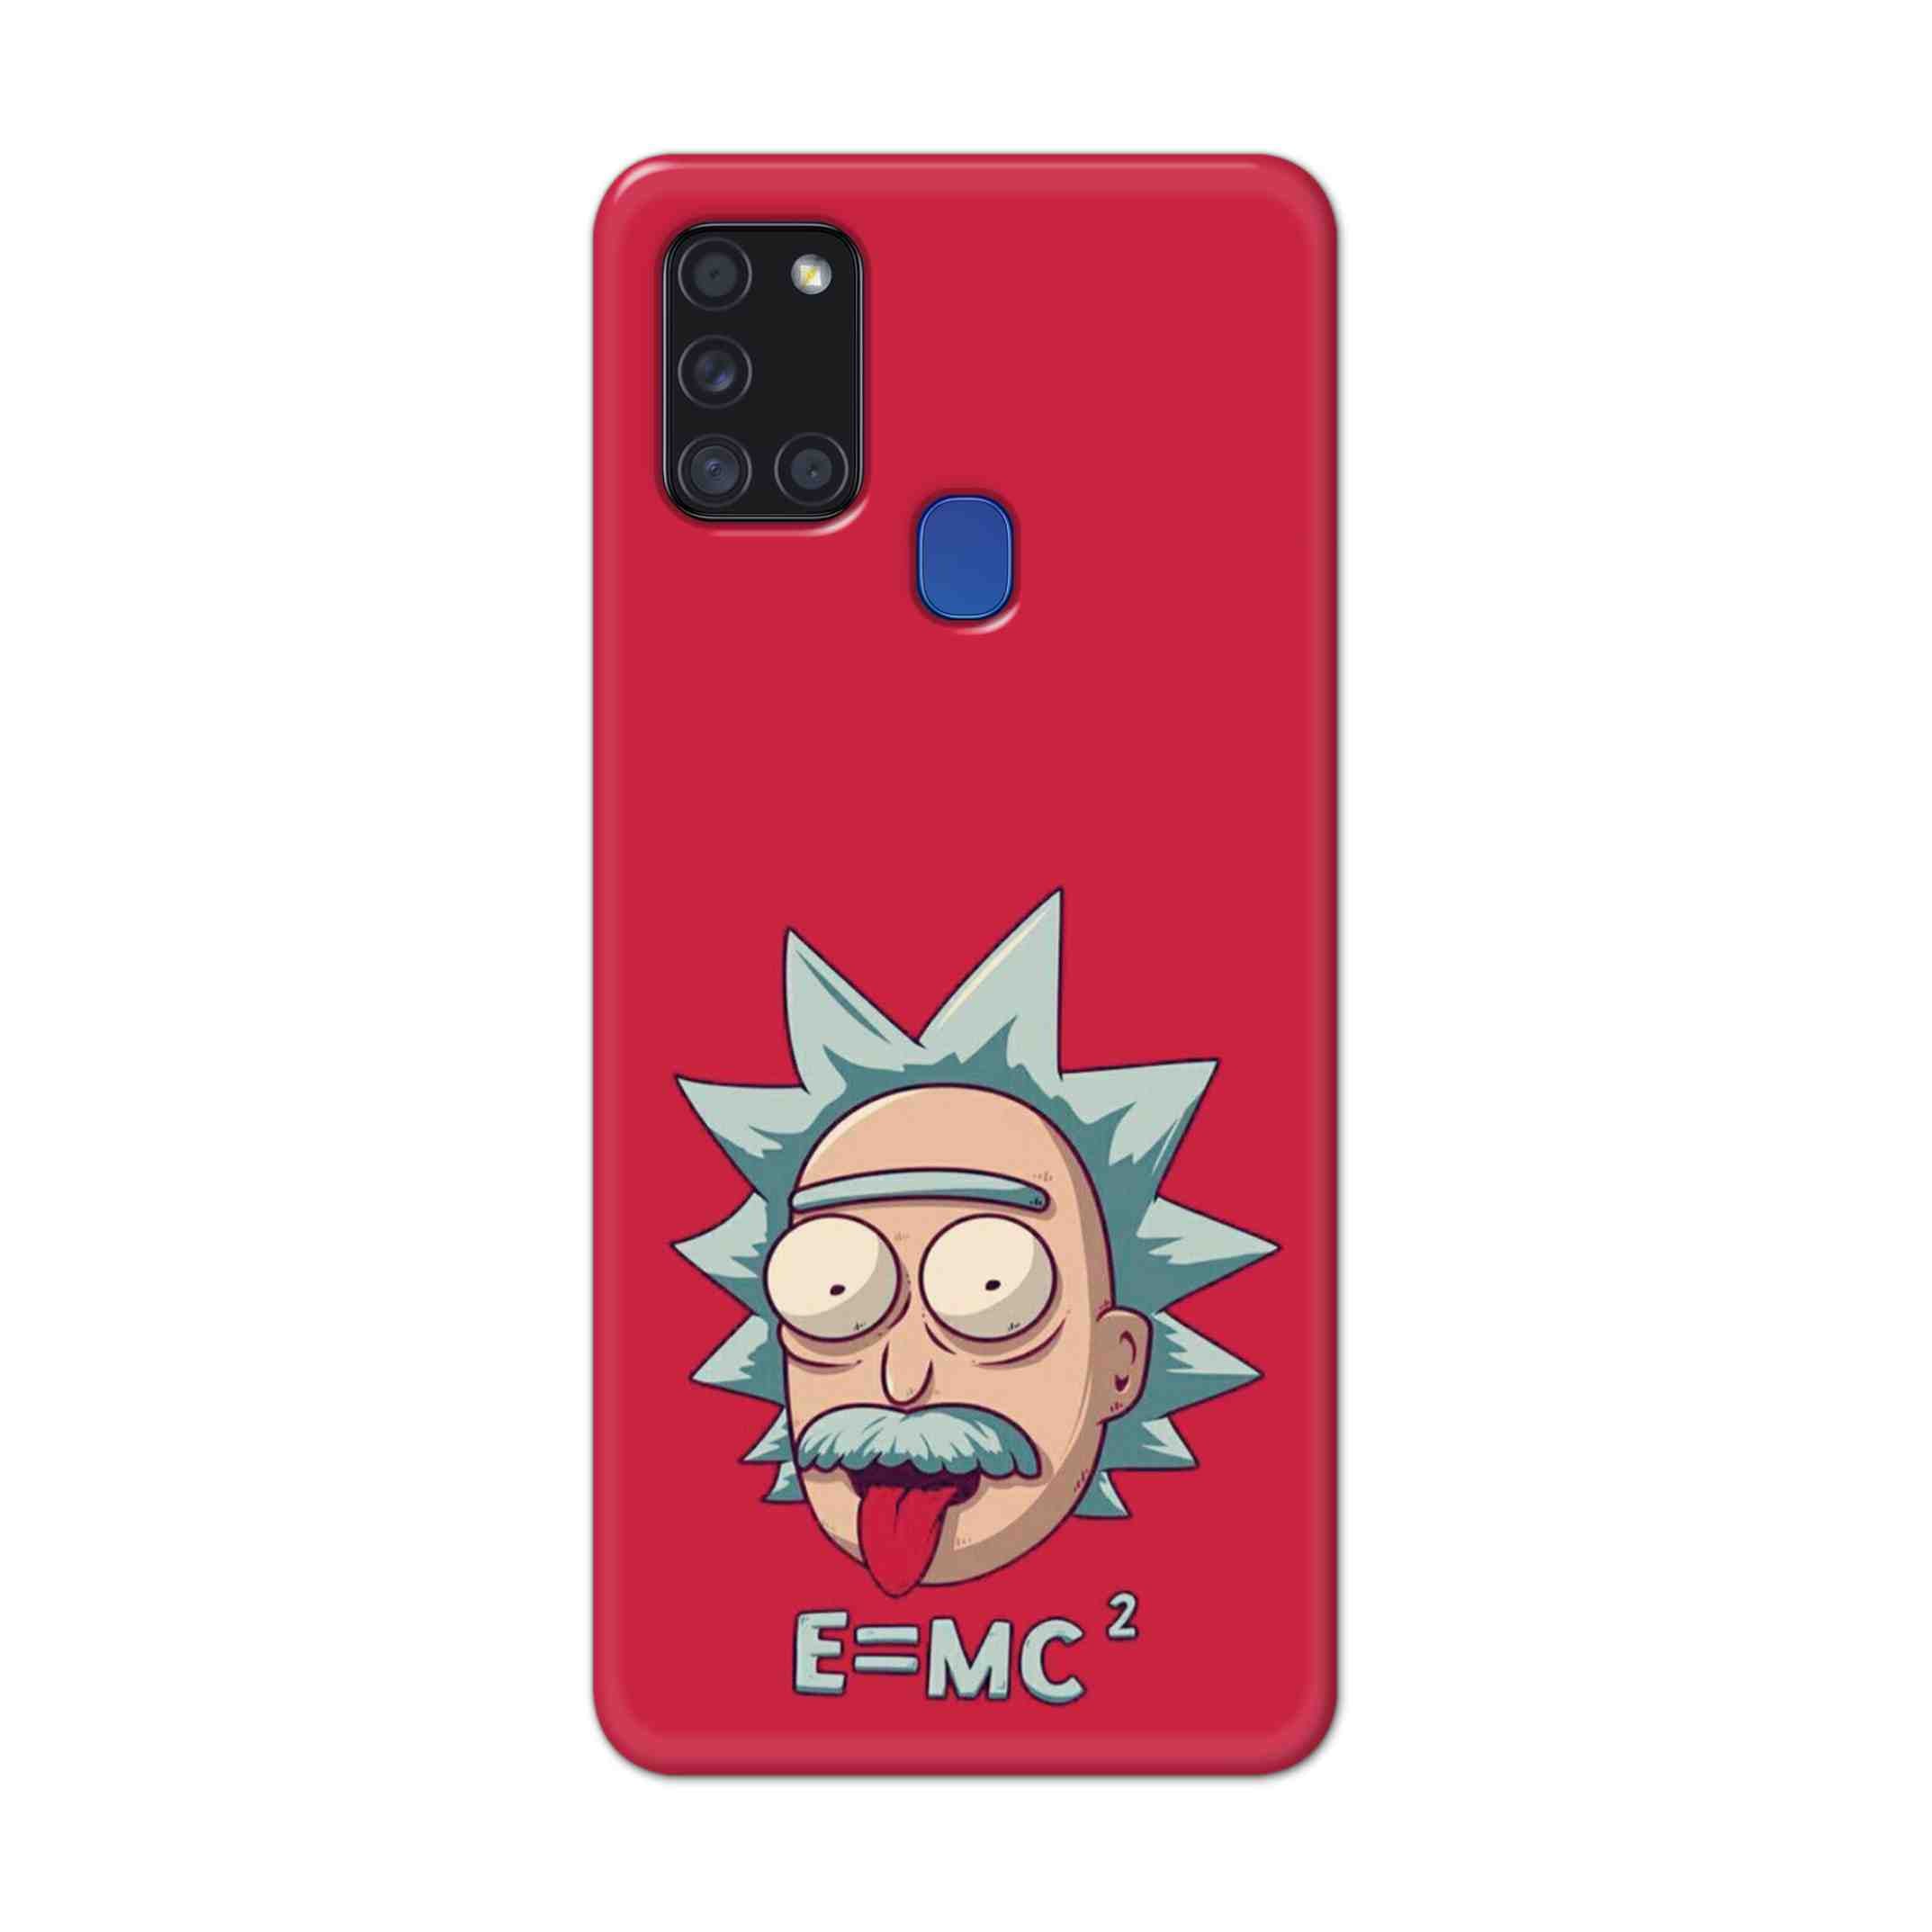 Buy E=Mc Hard Back Mobile Phone Case Cover For Samsung Galaxy A21s Online